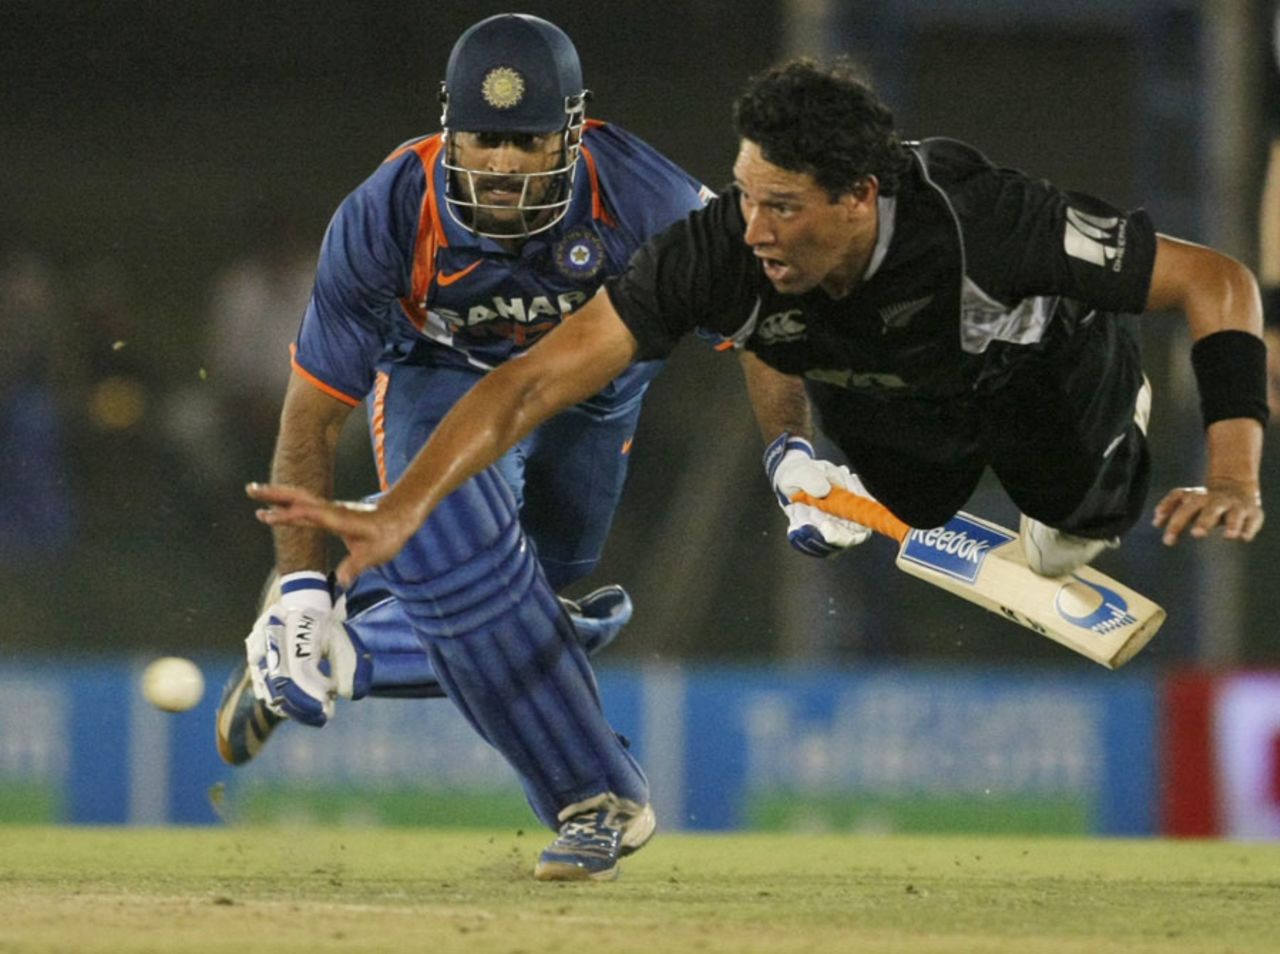 MS Dhoni is run out by Daryl Tuffey, India v New Zealand, tri-series, 1st ODI, August 10, 2010